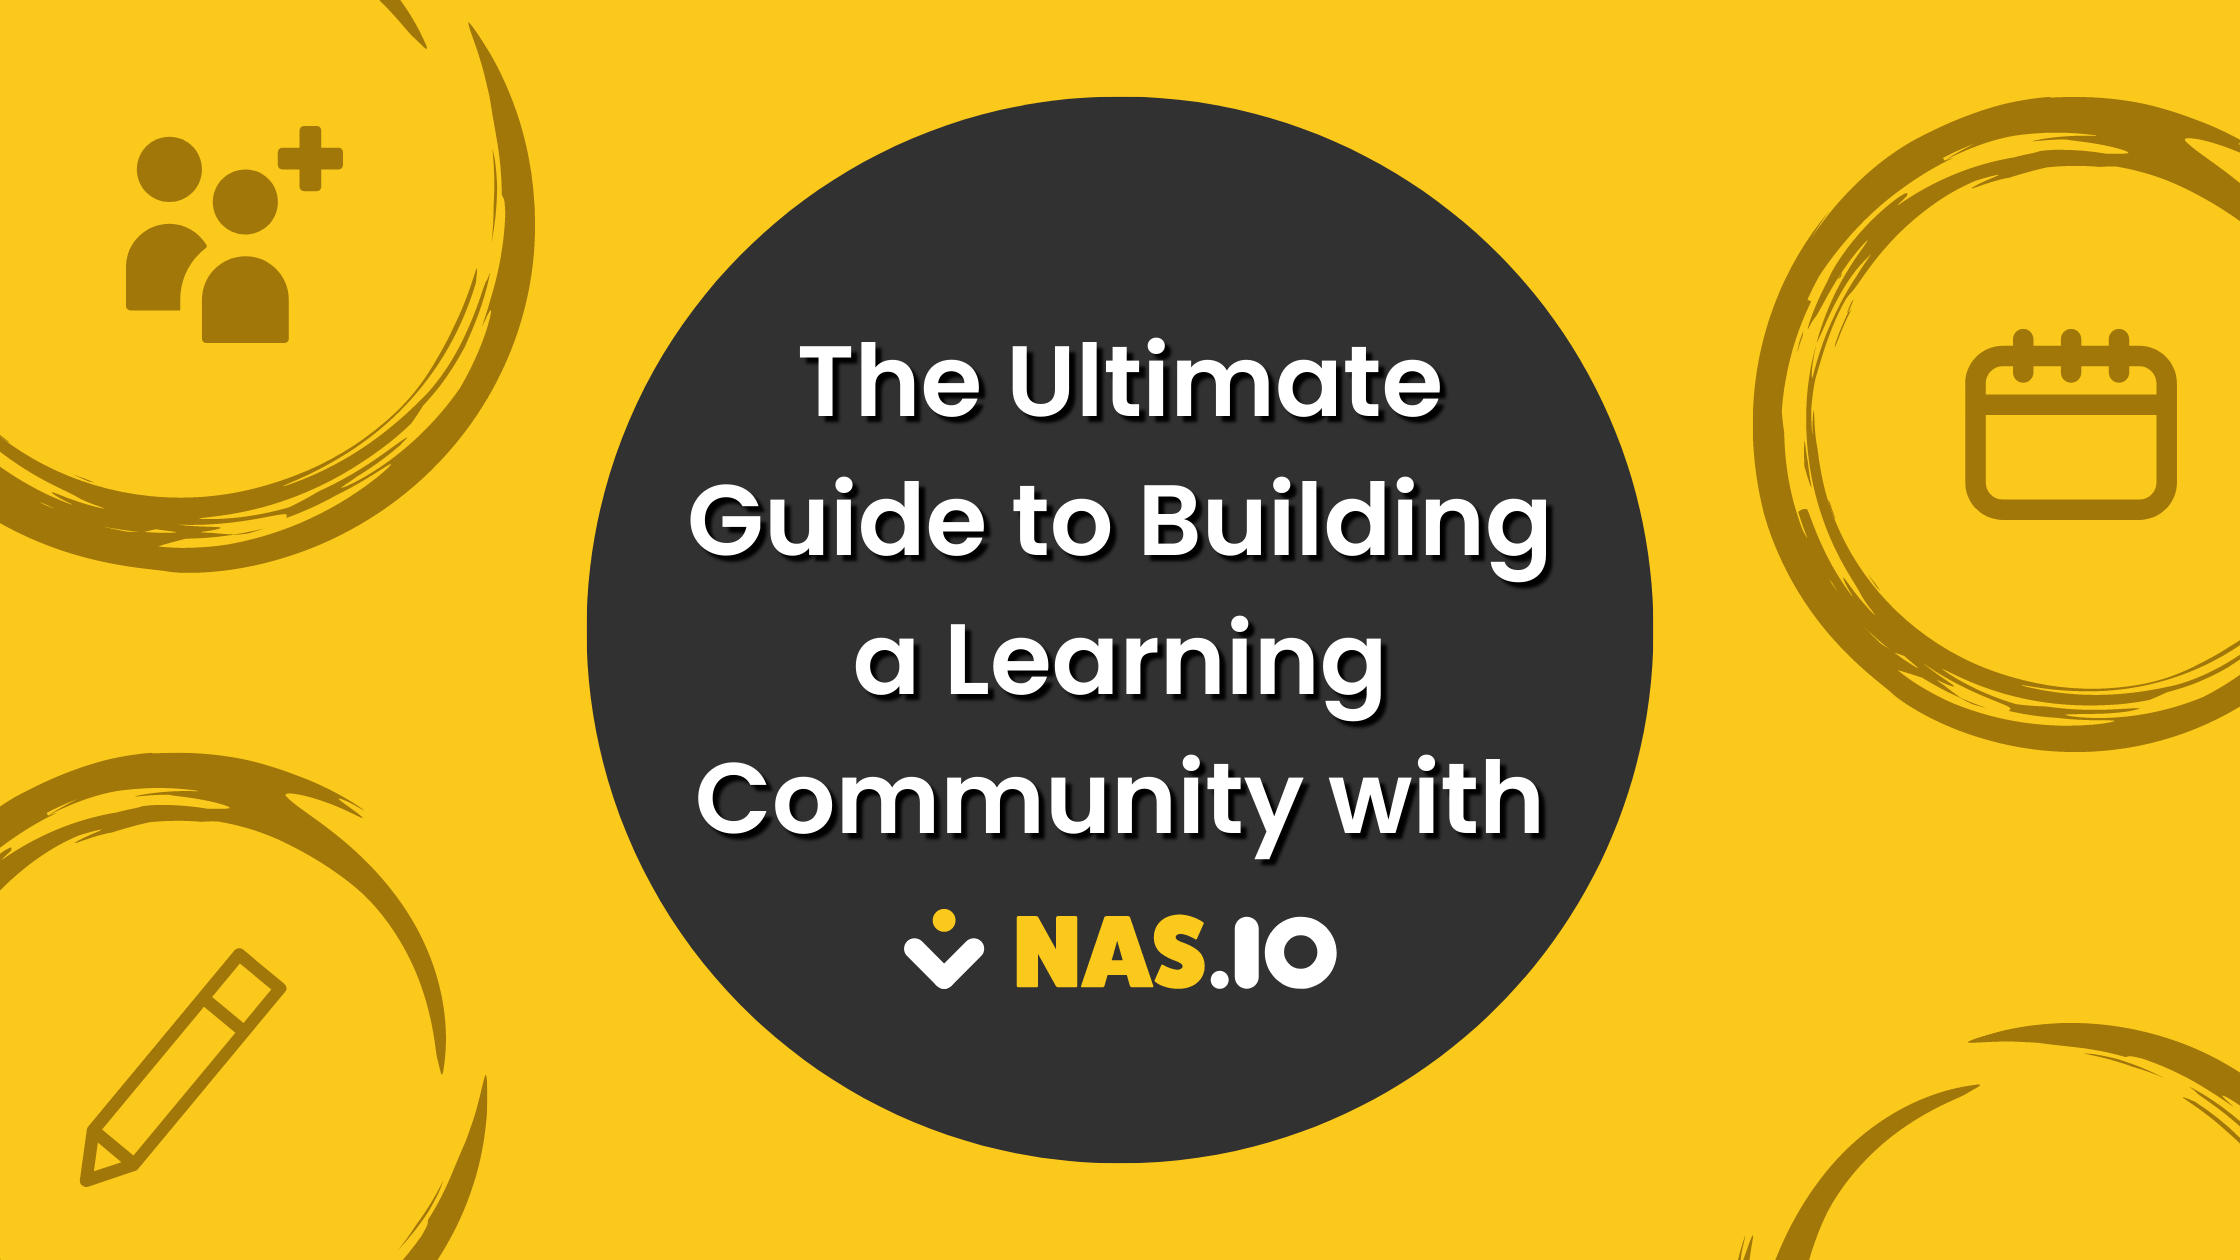 The Ultimate Guide to Building a Learning Community with Nas.io